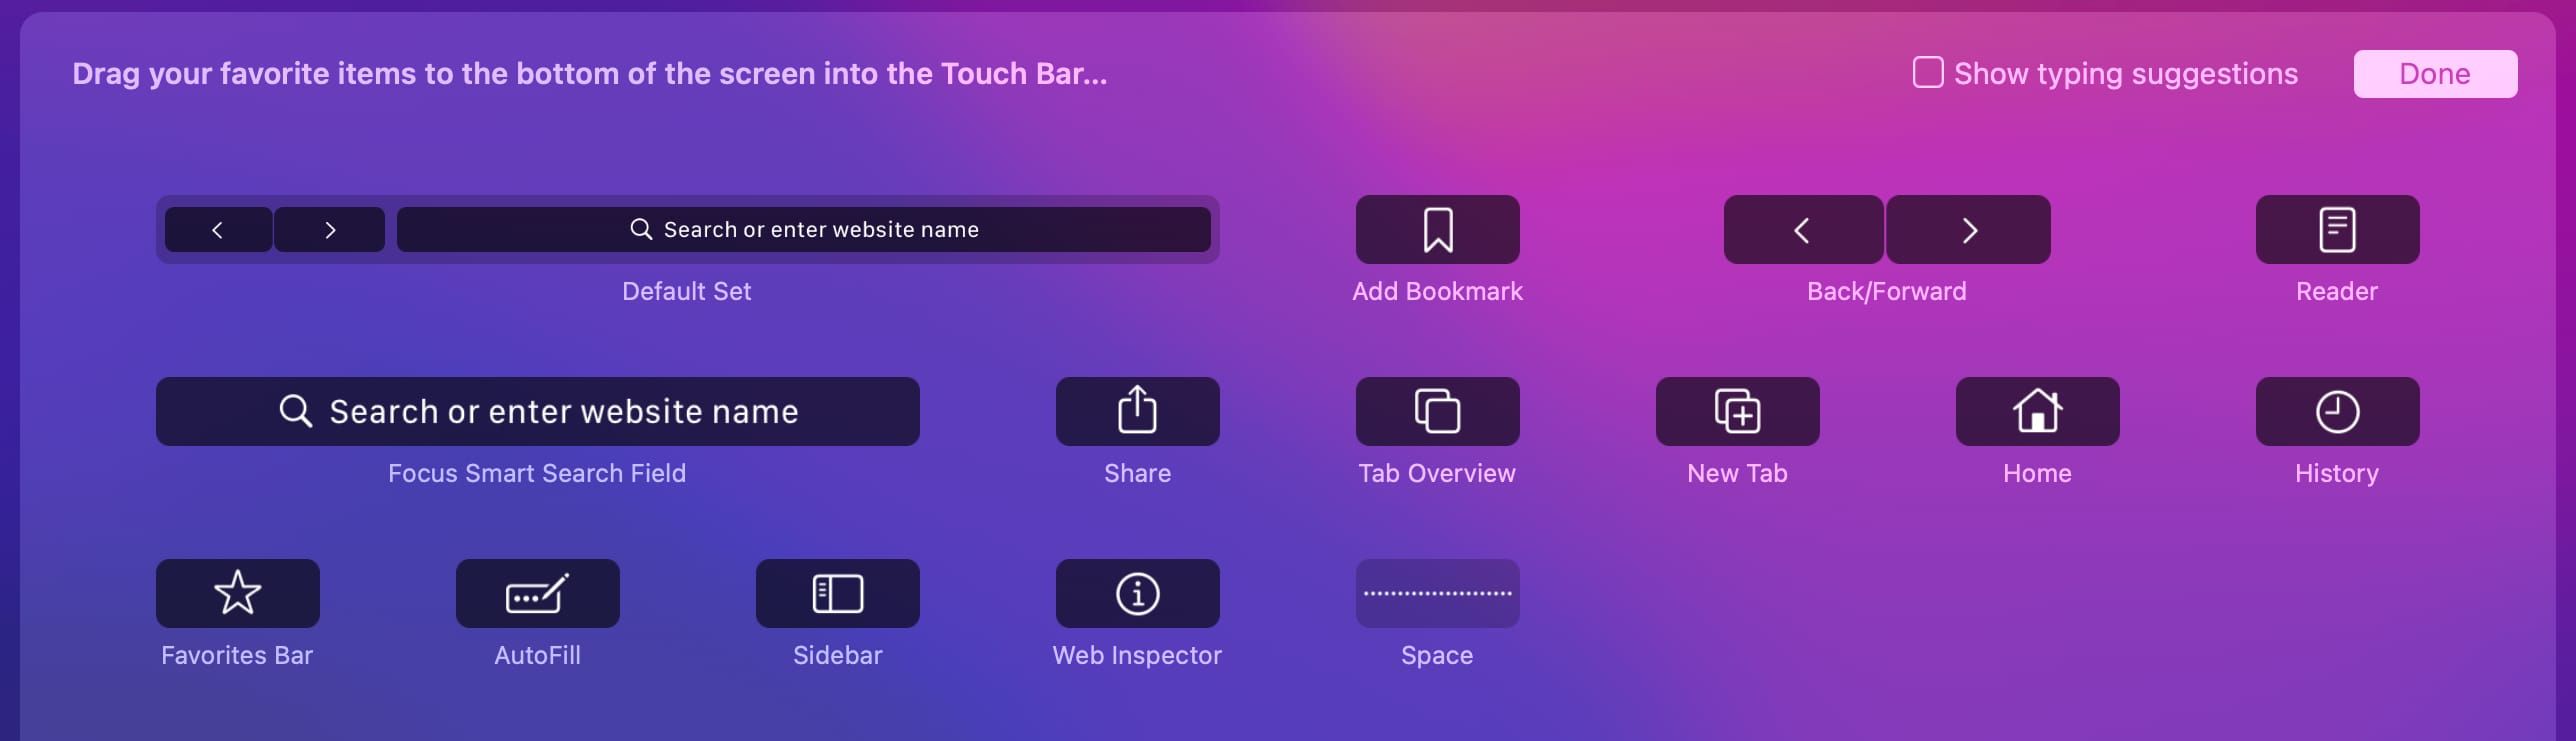 Customizing the Touch Bar shortcuts in Apple's Safari browser for the Mac on macOS Monterey